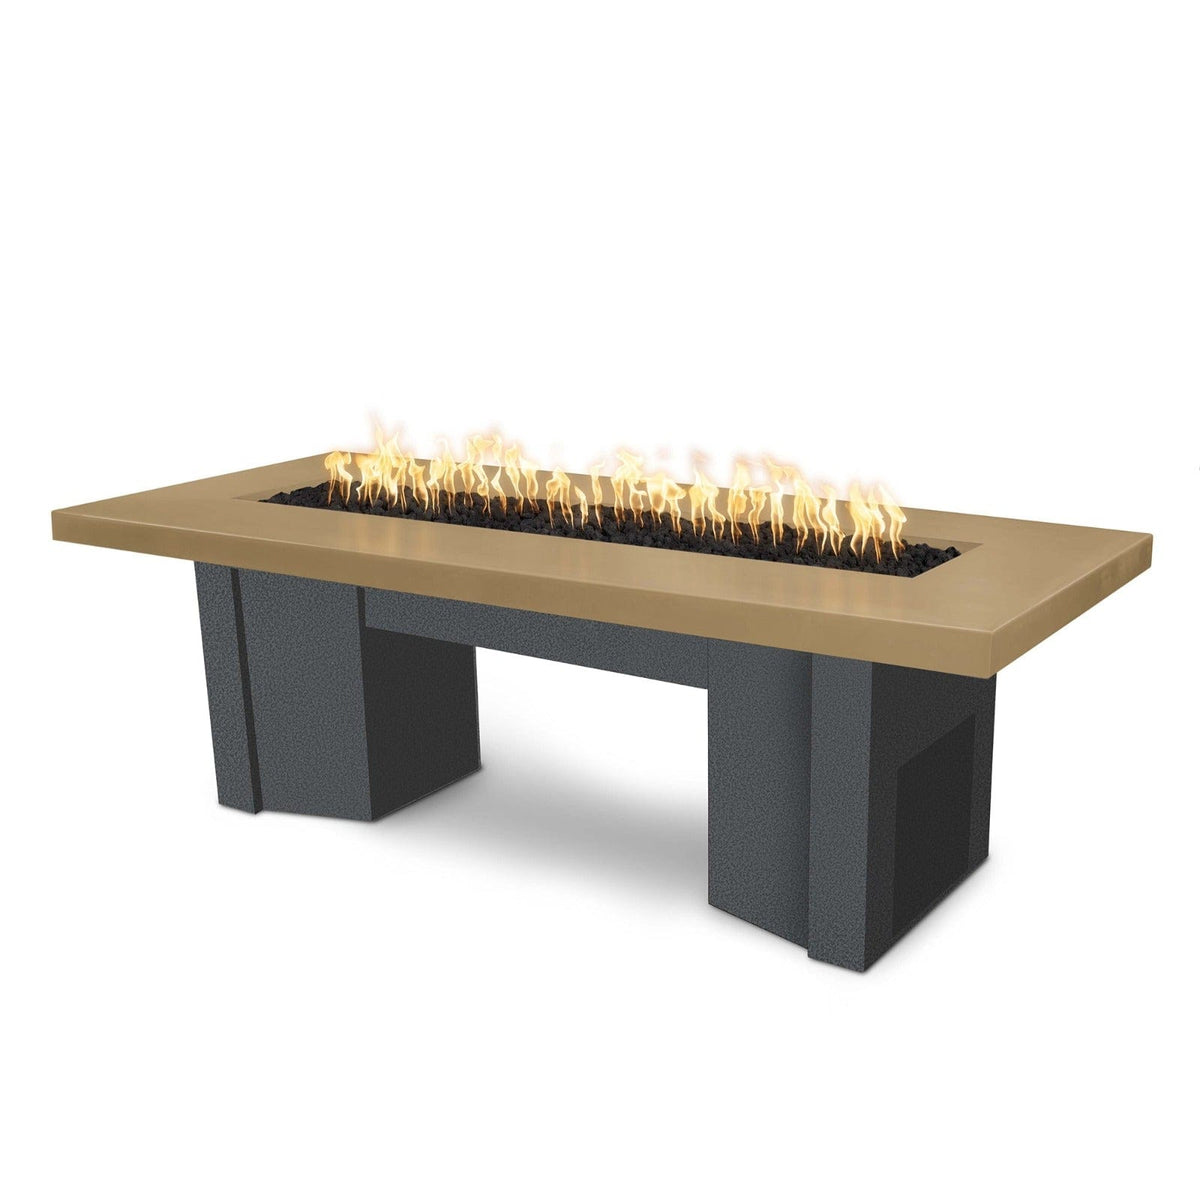 The Outdoor Plus Fire Features Brown (-BRN) / Silver Vein Powder Coated Steel (-SLV) The Outdoor Plus 78&quot; Alameda Fire Table Smooth Concrete in Liquid Propane - Flame Sense System with Push Button Spark Igniter / OPT-ALMGFRC78FSEN-LP